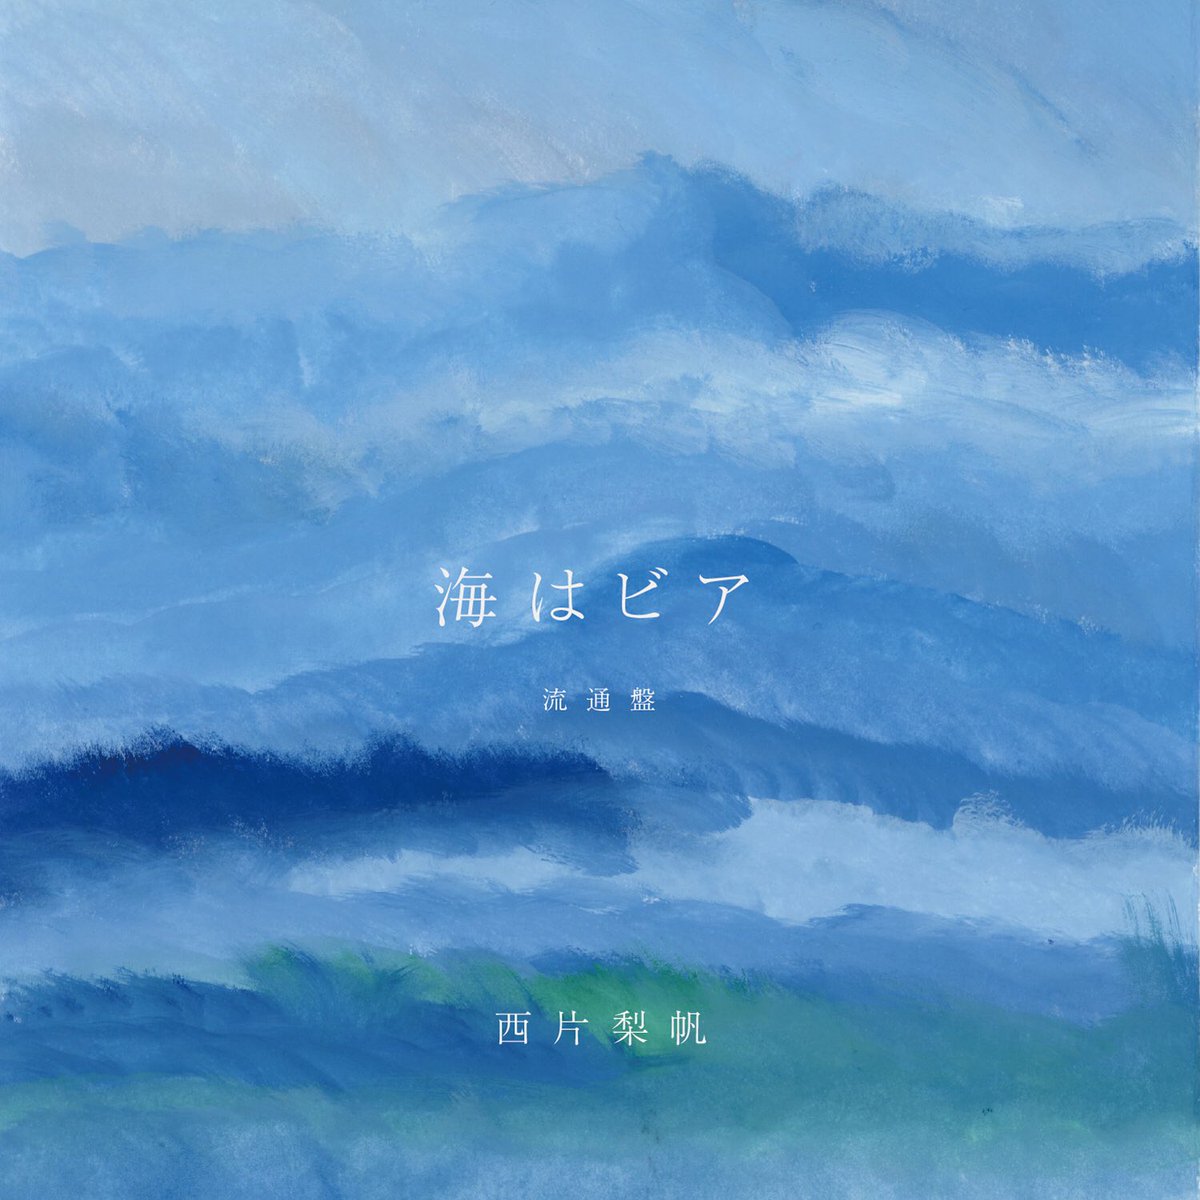 Cover art for『riho nishikata - 23:13』from the release『Umi wa Beer